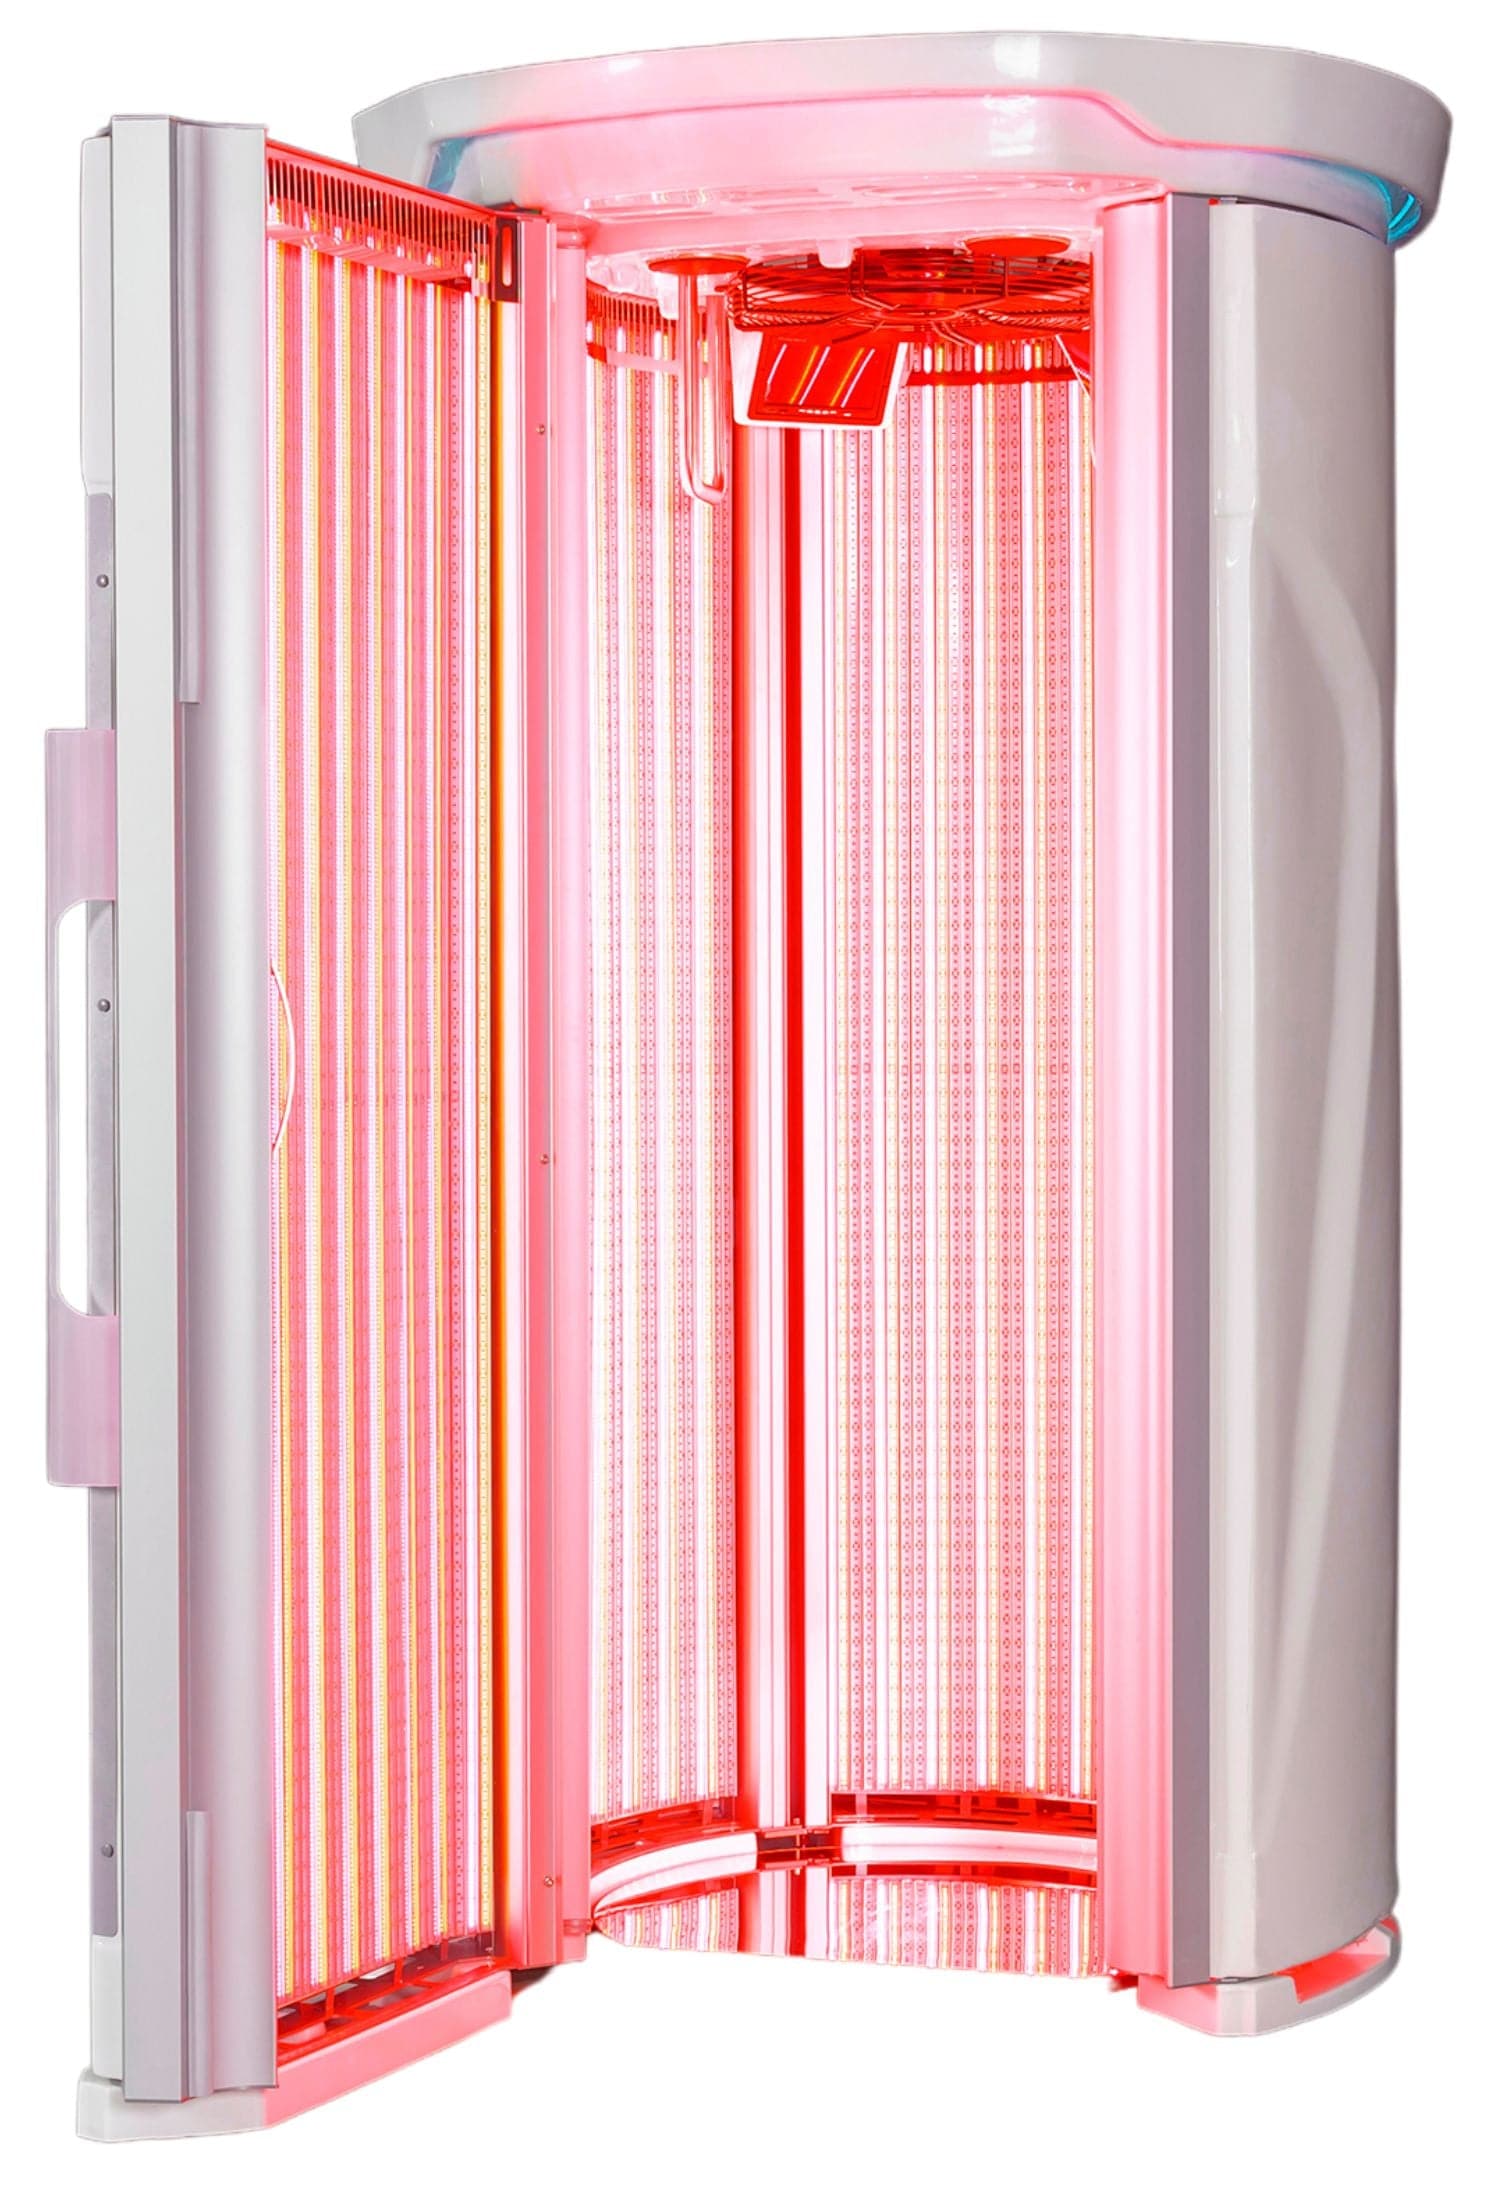 Red light therapy cabin N7000 by NanoROTLicht